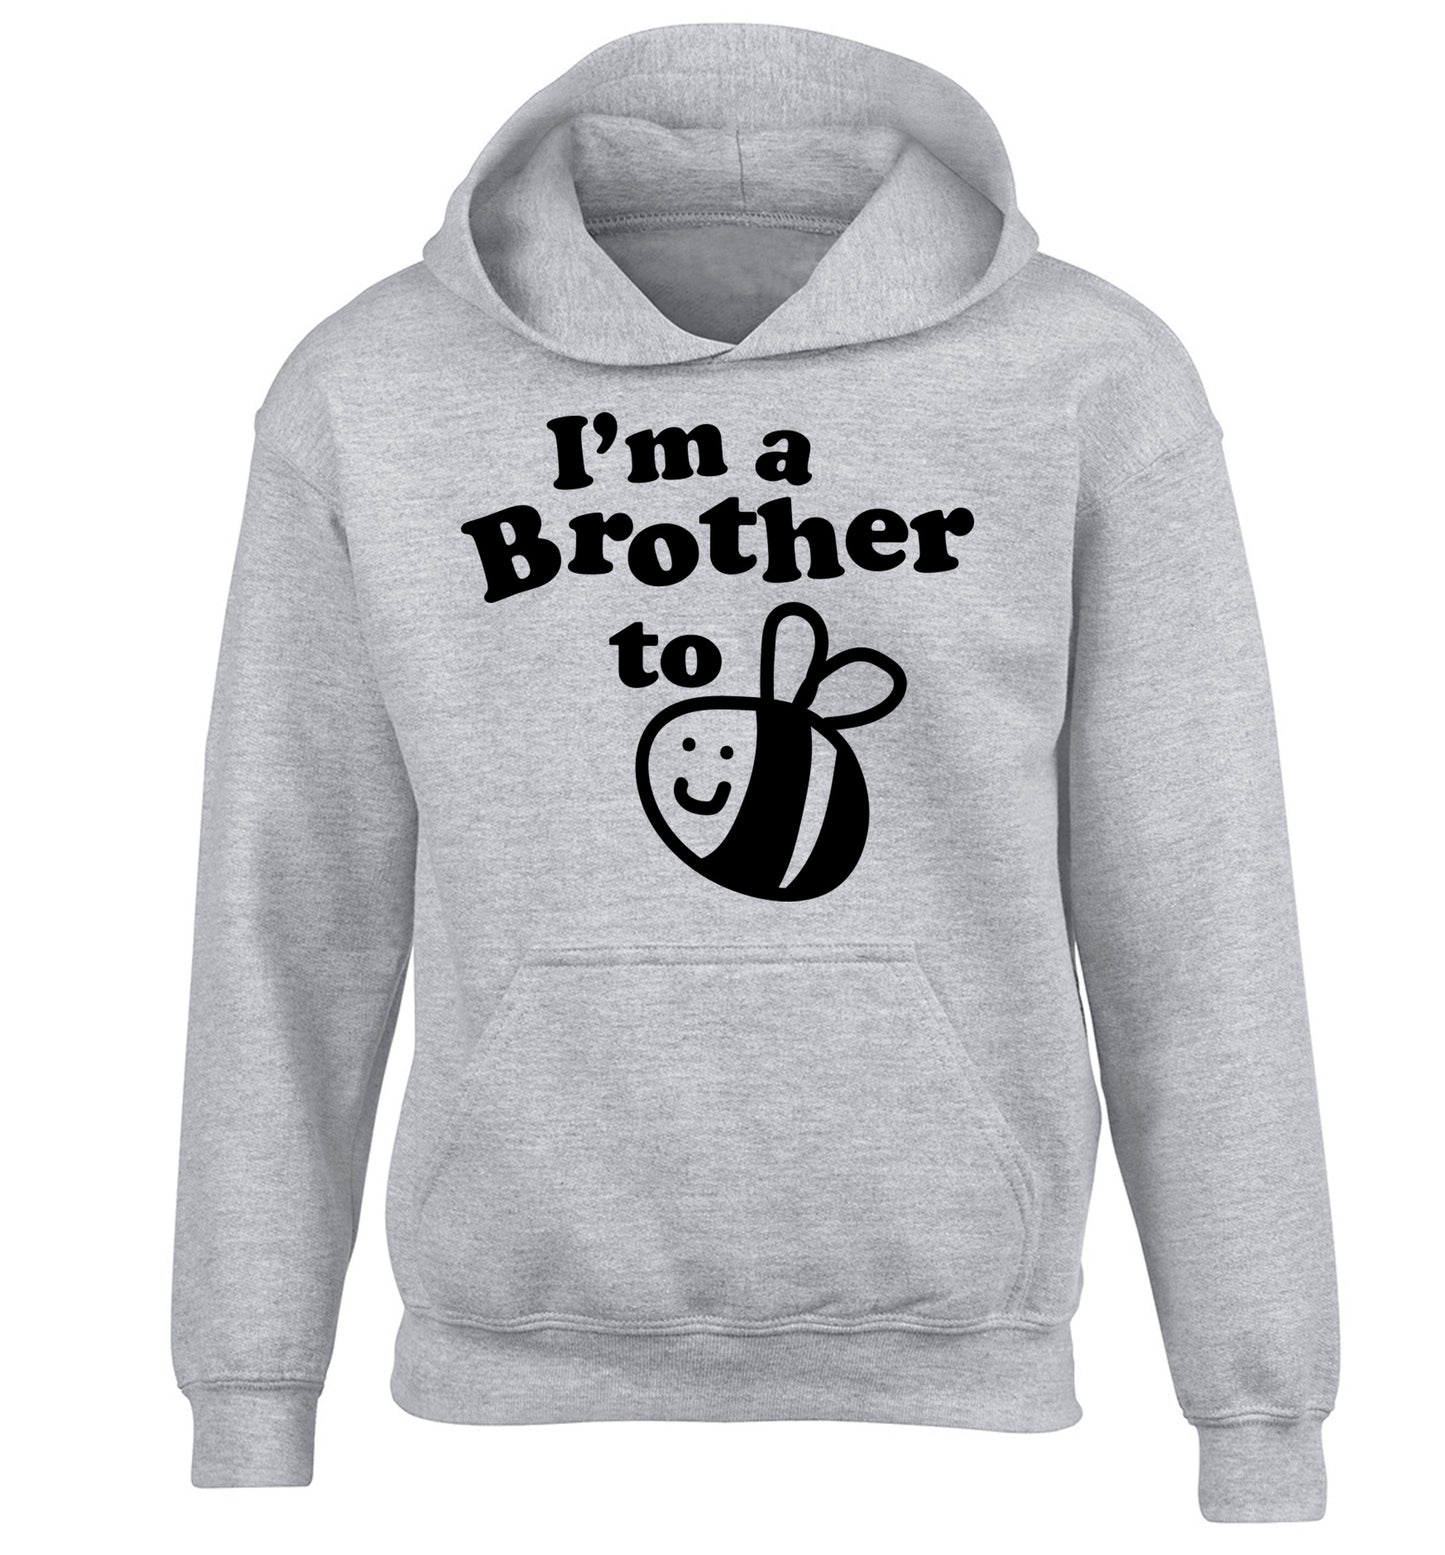 I'm a brother to be children's grey hoodie 12-14 Years